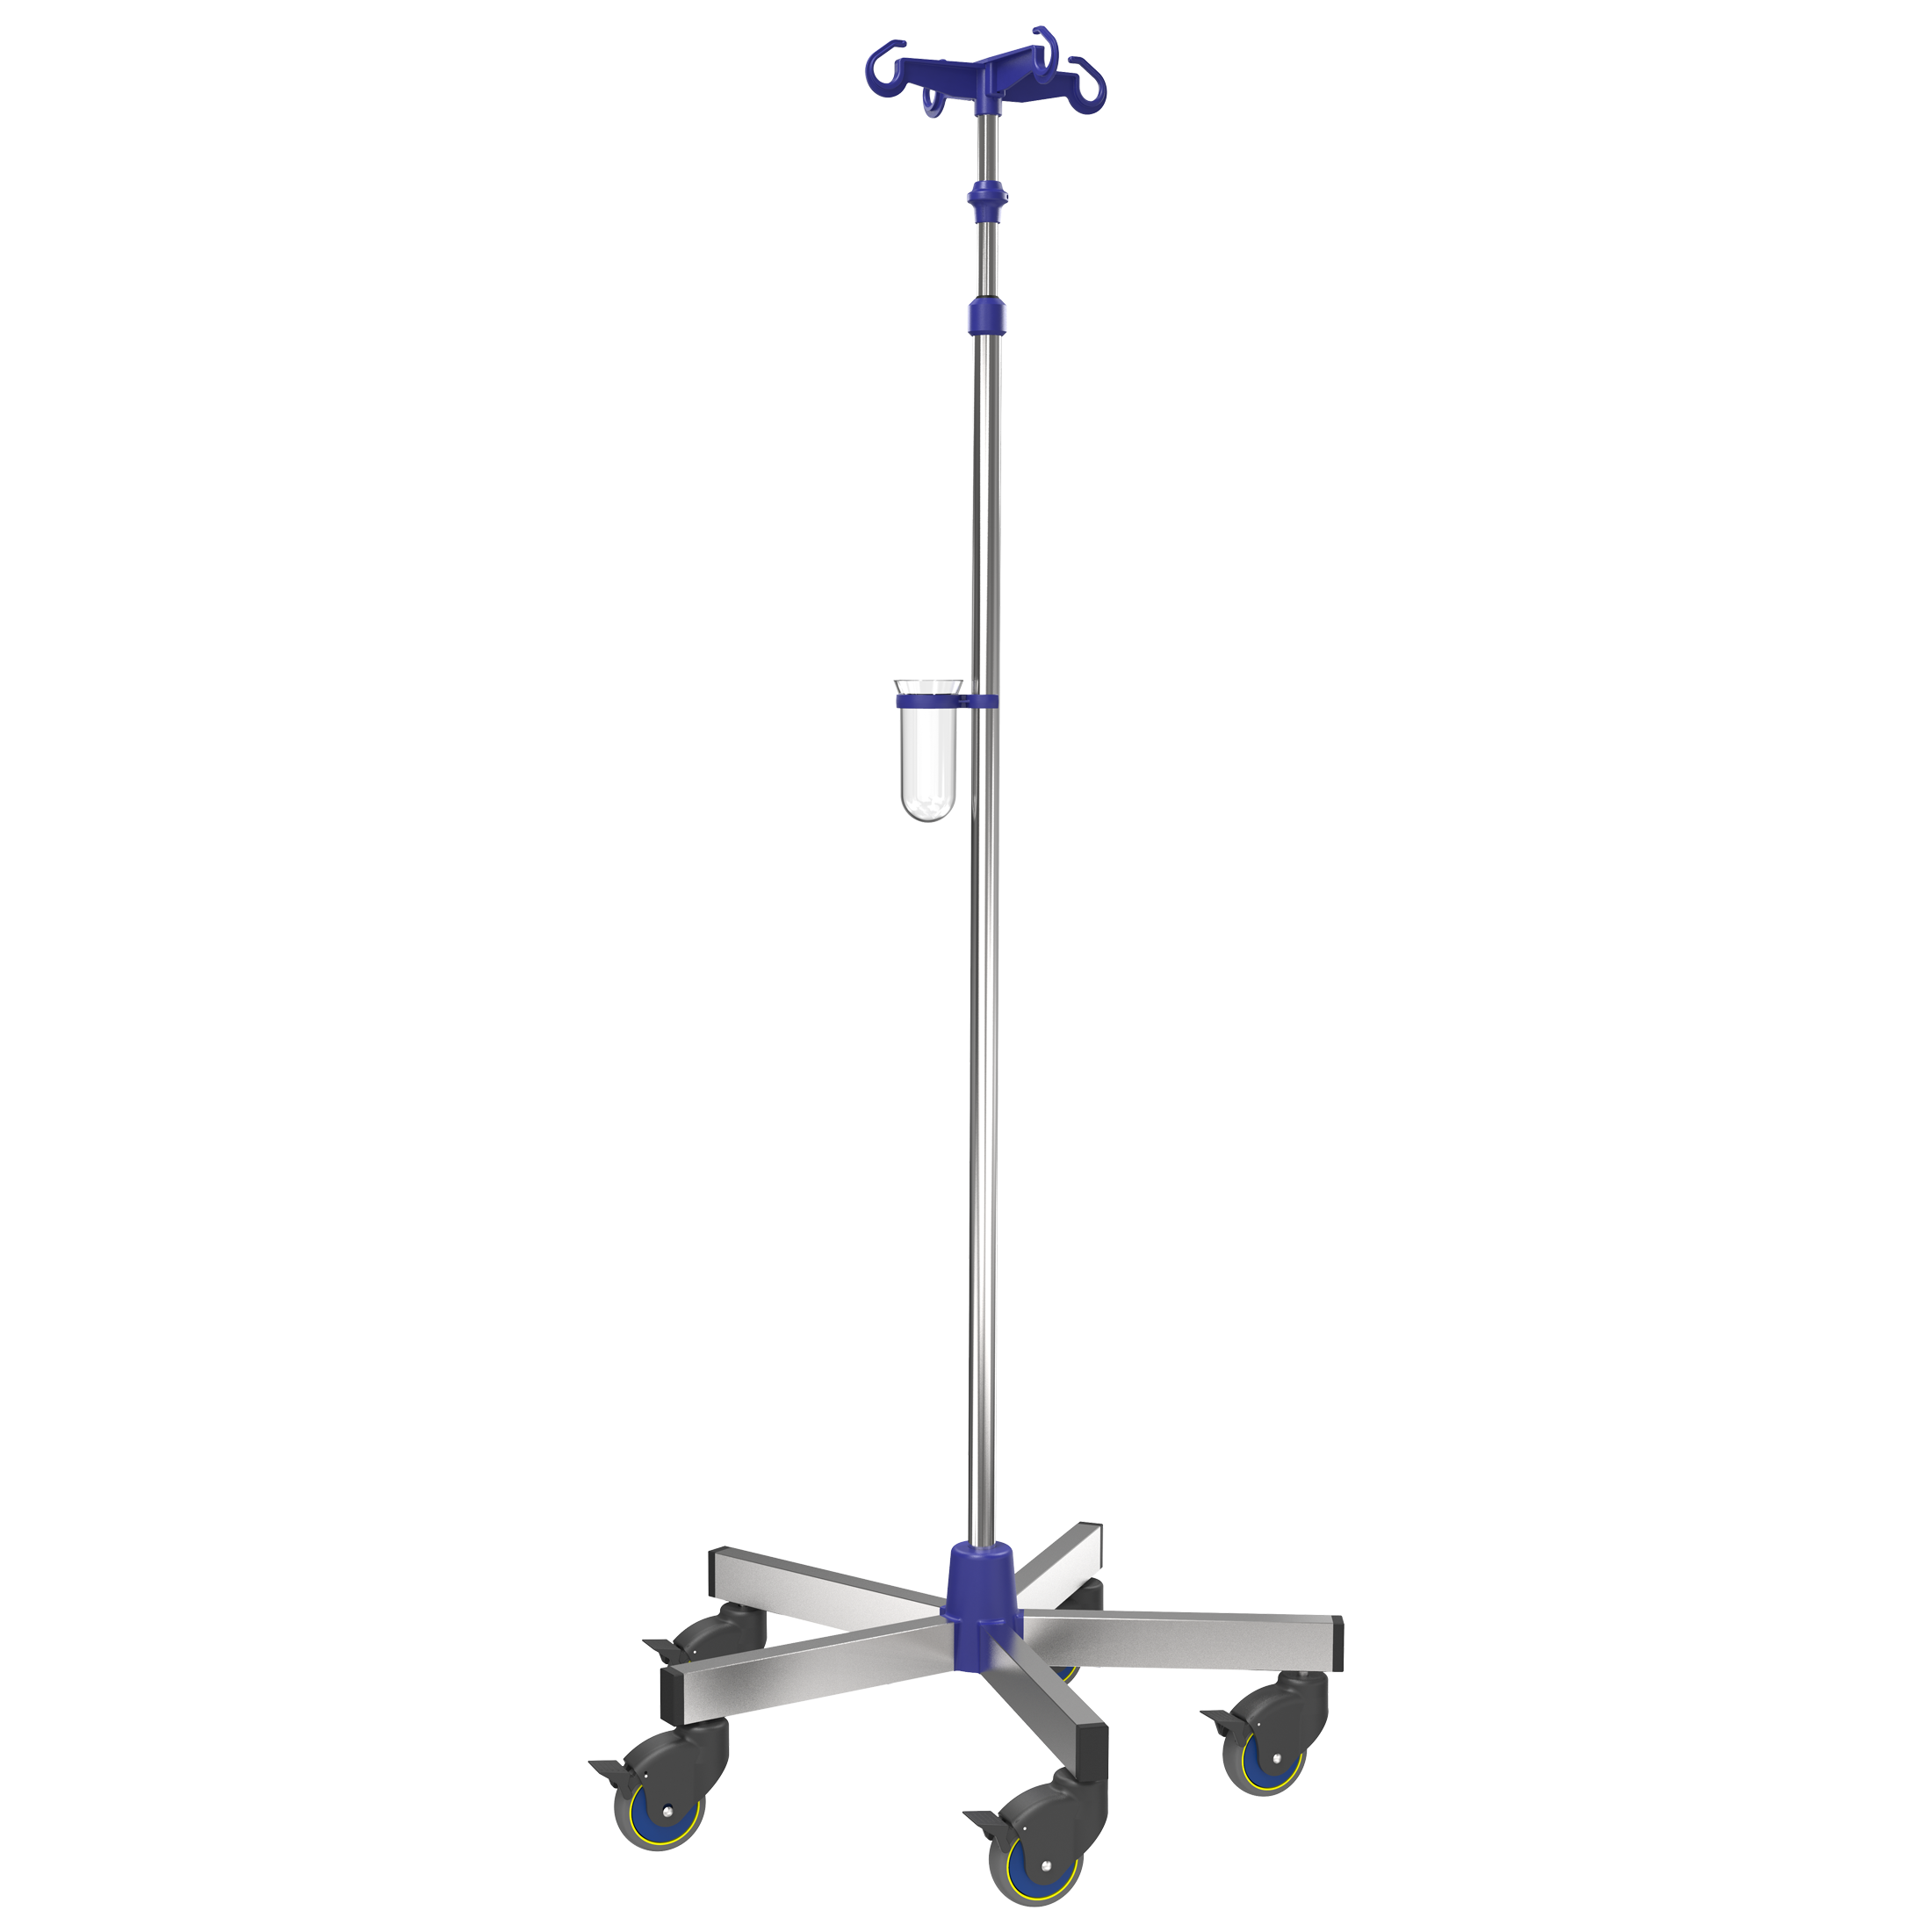 IV stand / Drip stand